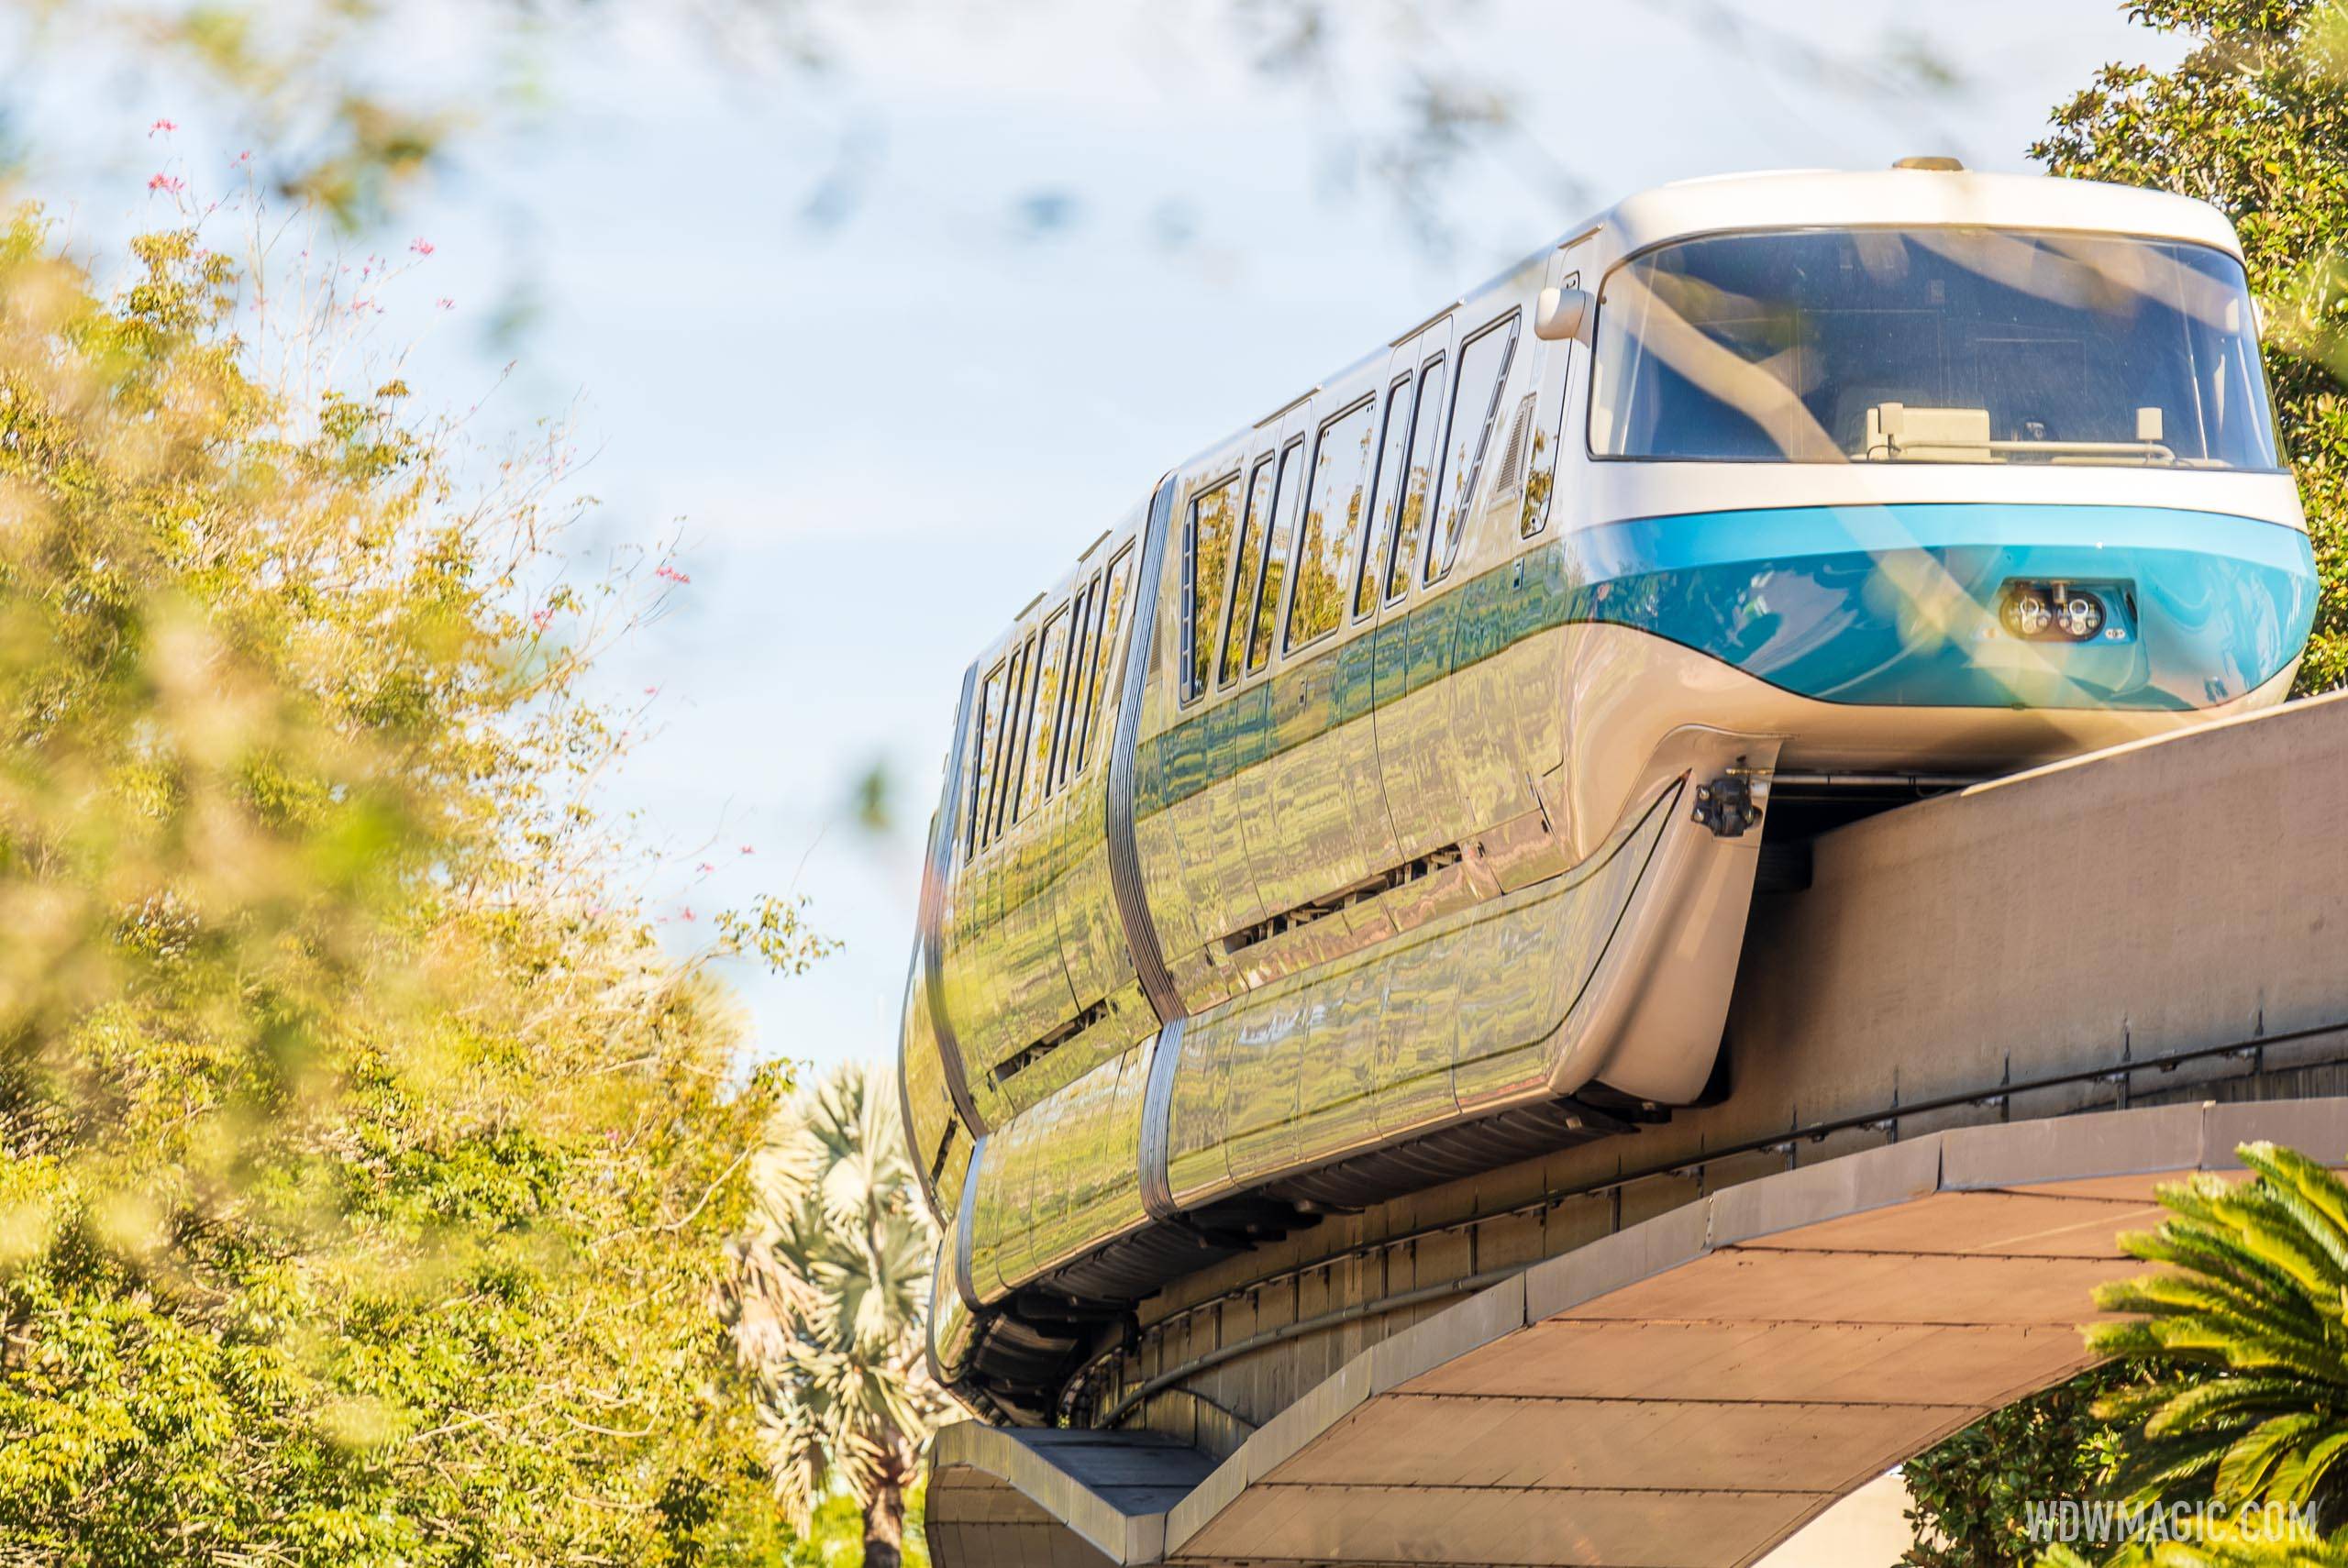 Guests are currently required to wear masks aboard the monorail system at Walt Disney World